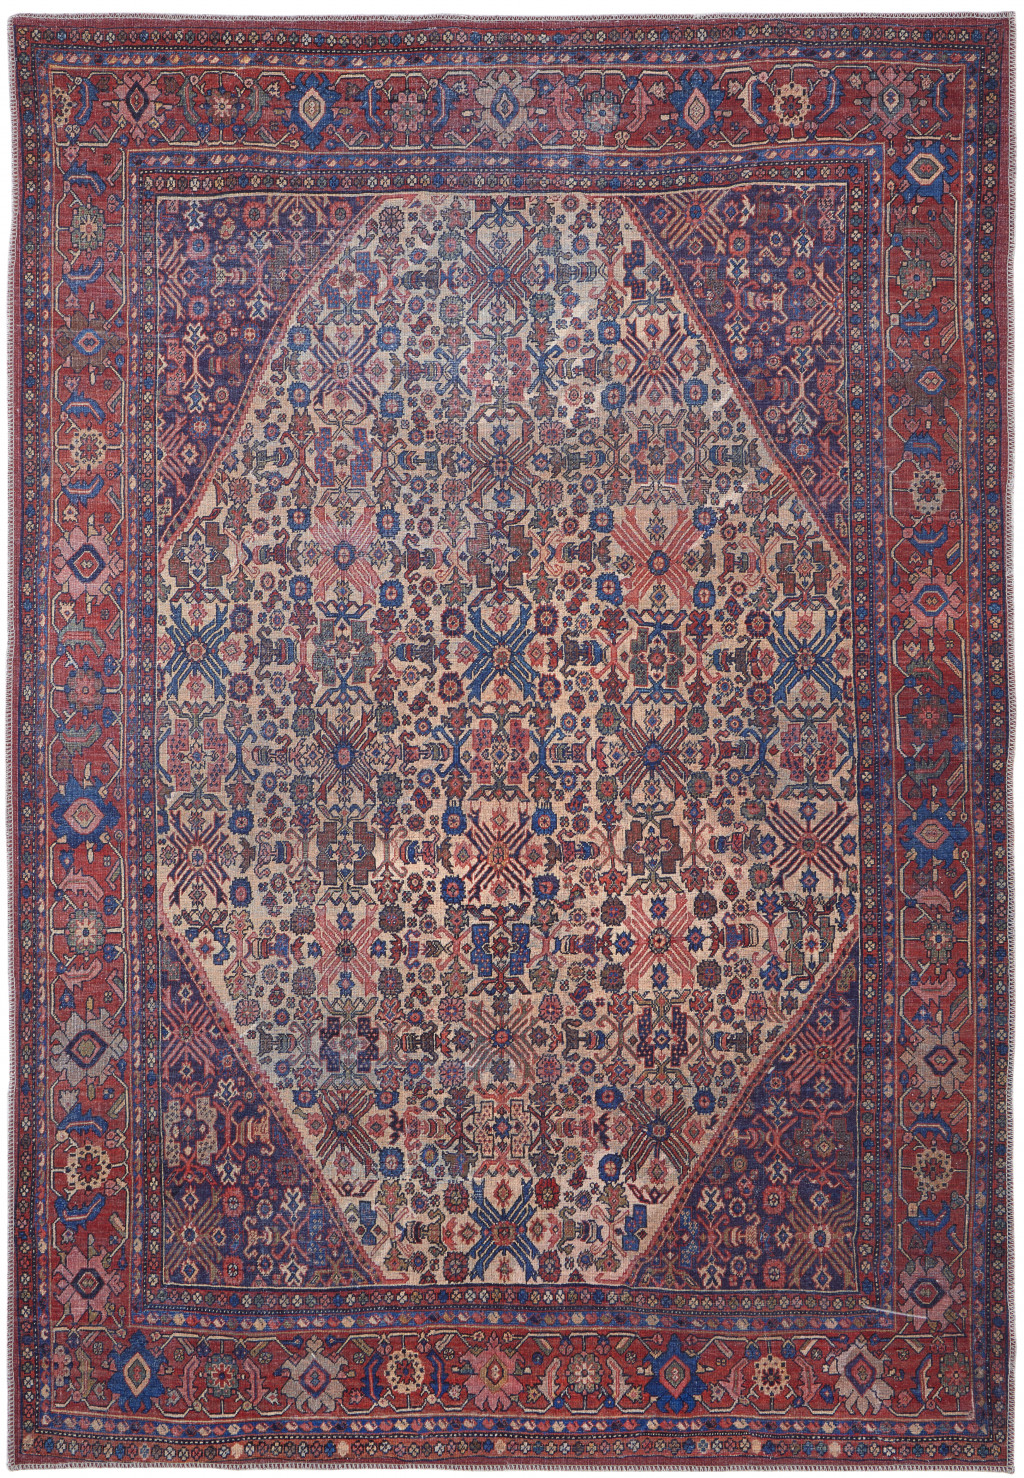 10' X 14' Red Tan And Blue Floral Power Loom Area Rug-515130-1